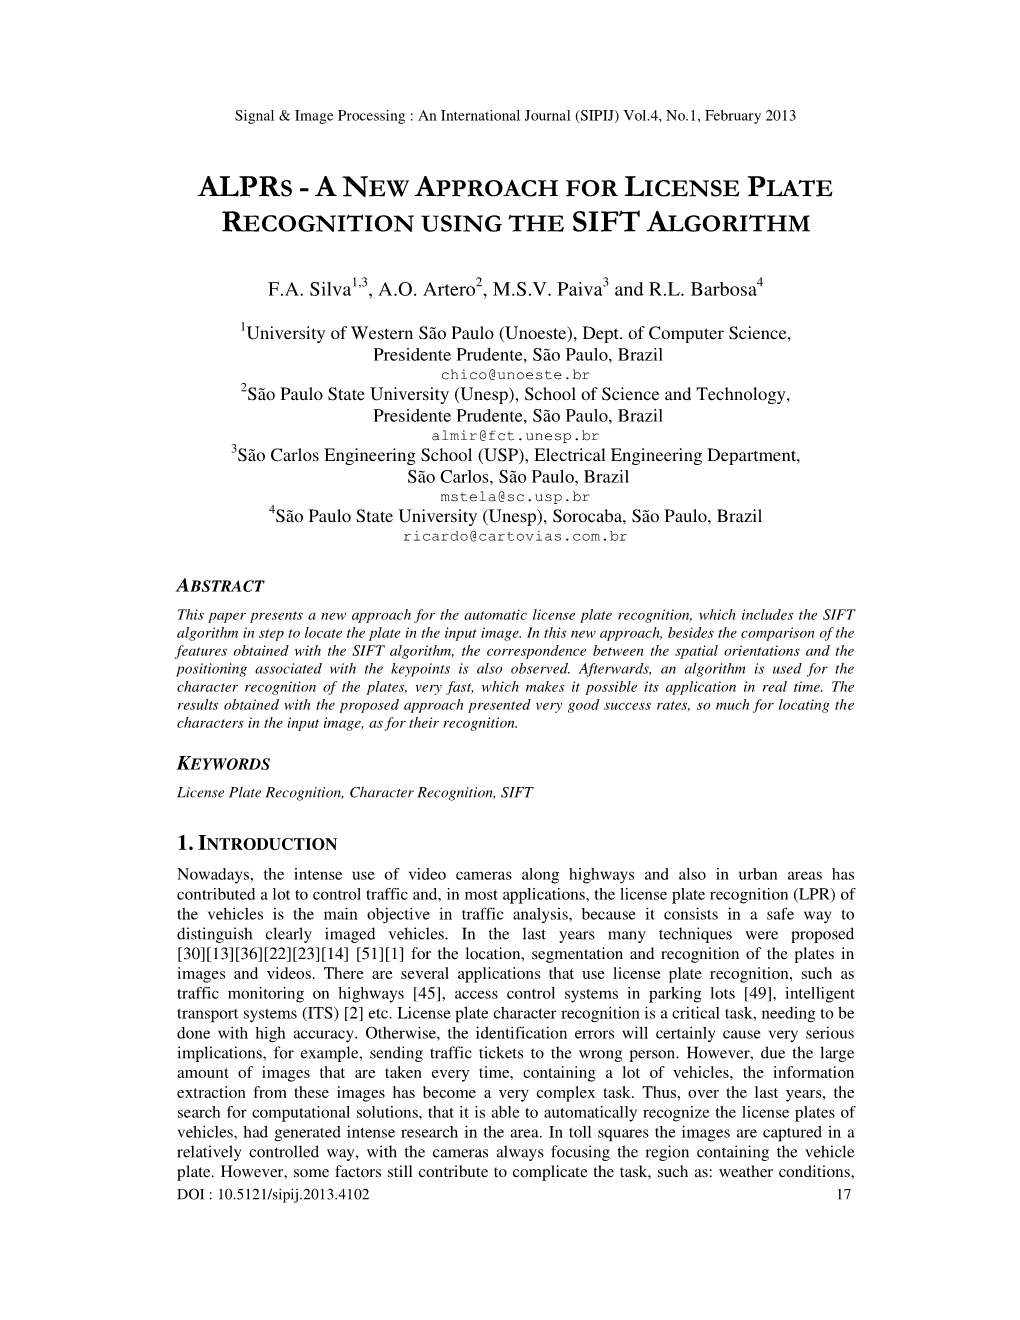 Anew Approach for License Plate Recognition Using the Sift Algorithm